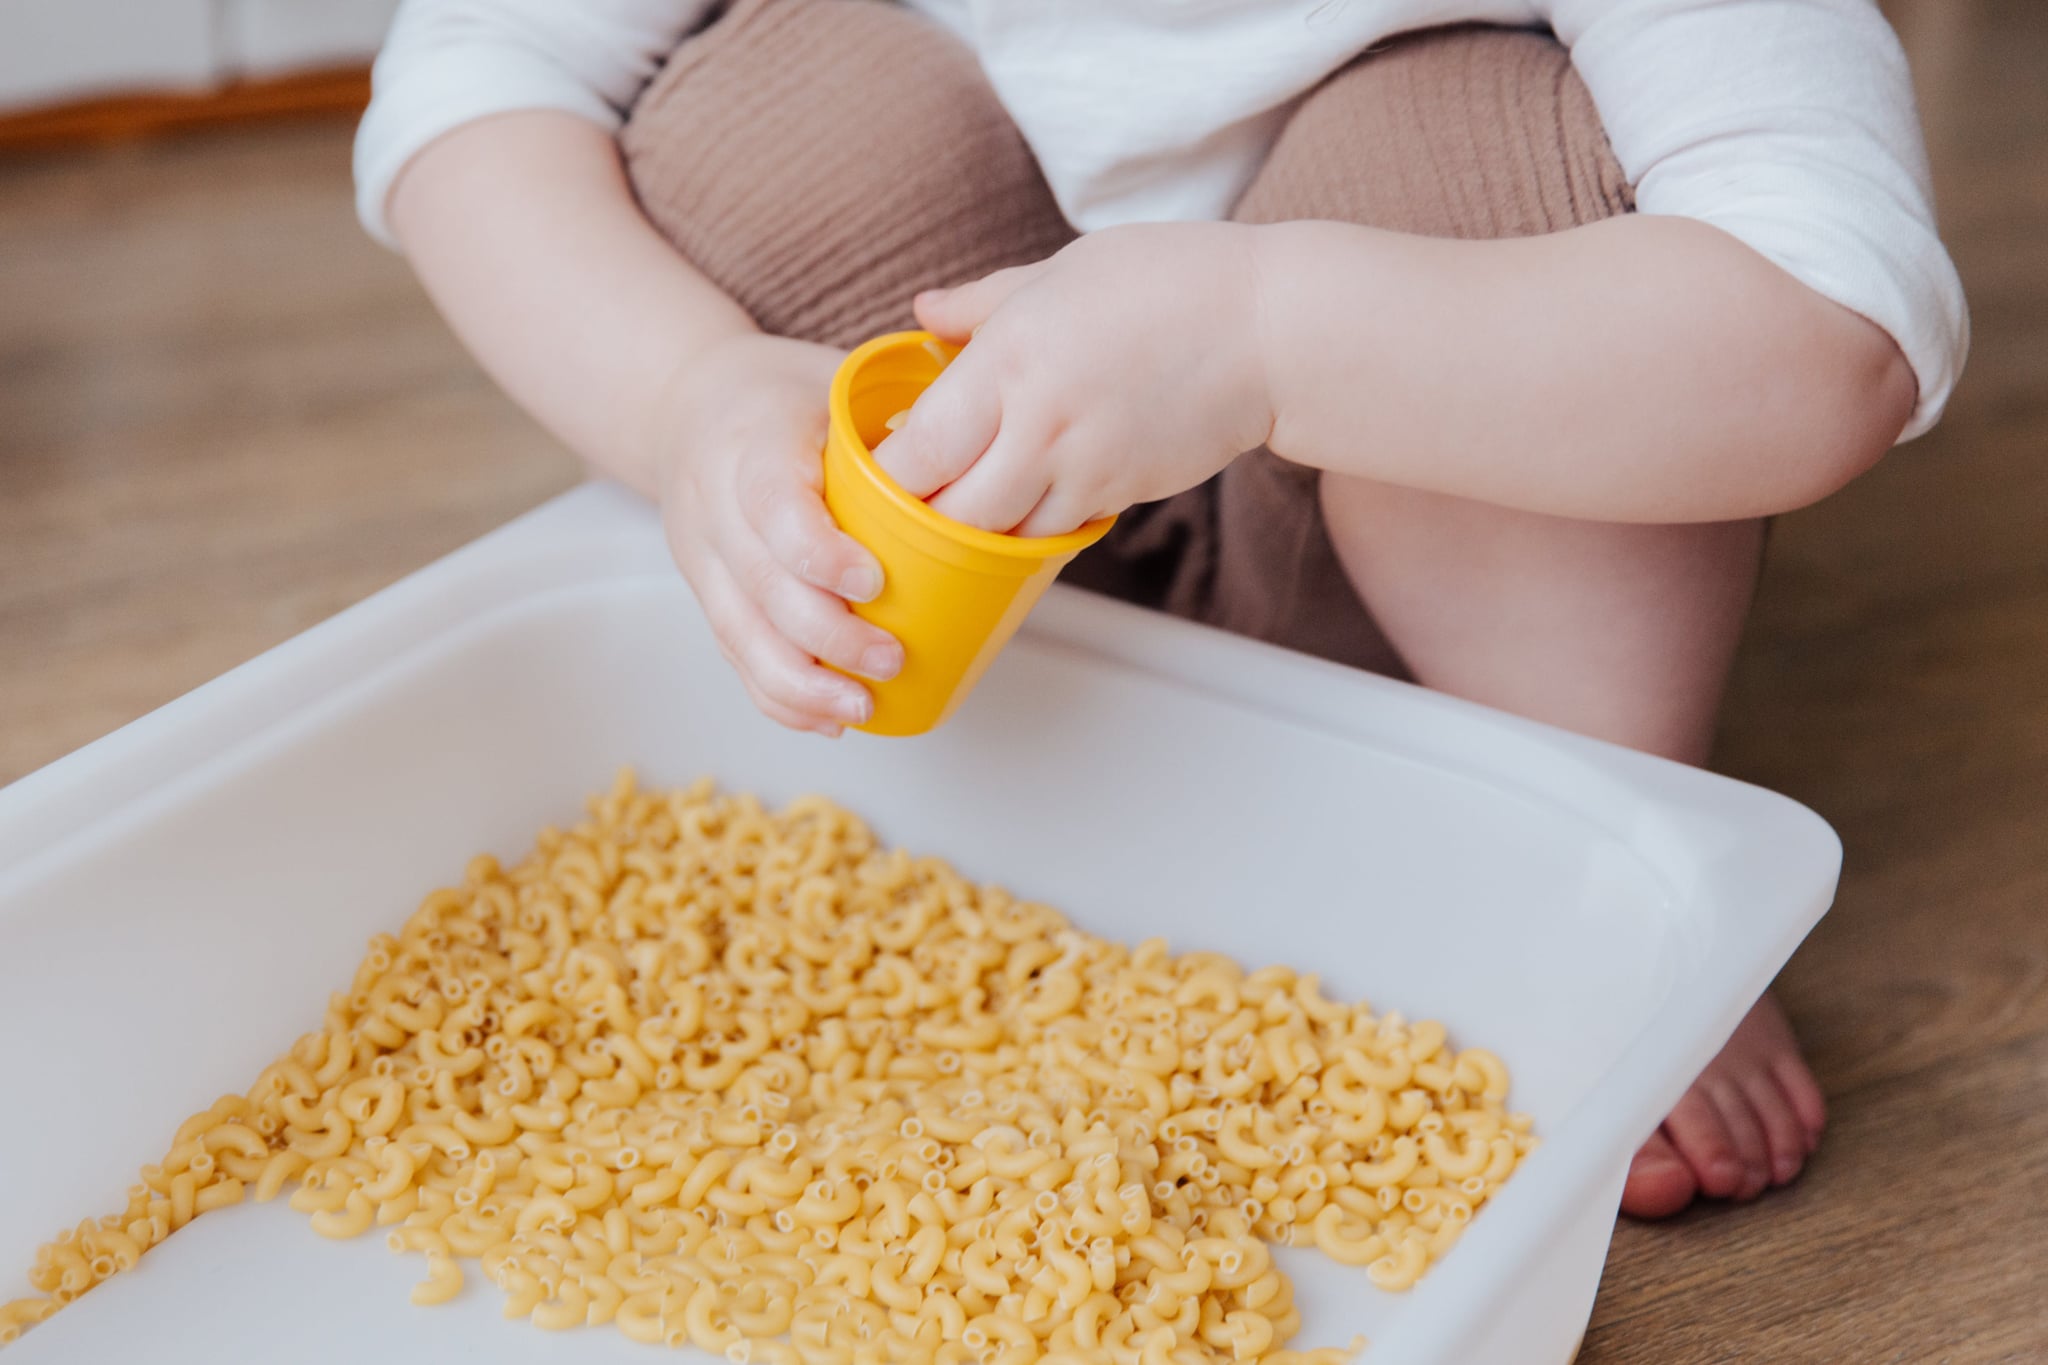 <p>Sensory toys can be a fun way to engage younger children. However, parents can also get creative and <a class="sugar-inline-link ga-track" title="Latest photos and news for DIY" href="https://www.popsugar.com/DIY">DIY</a> these fun indoor activities for toddlers. Crushed-up Cheerios with a shovel become edible sand, and even a bowl of water with bath toys can make a splash inside. Not in the mood to create? You can find readymade options online.</p>